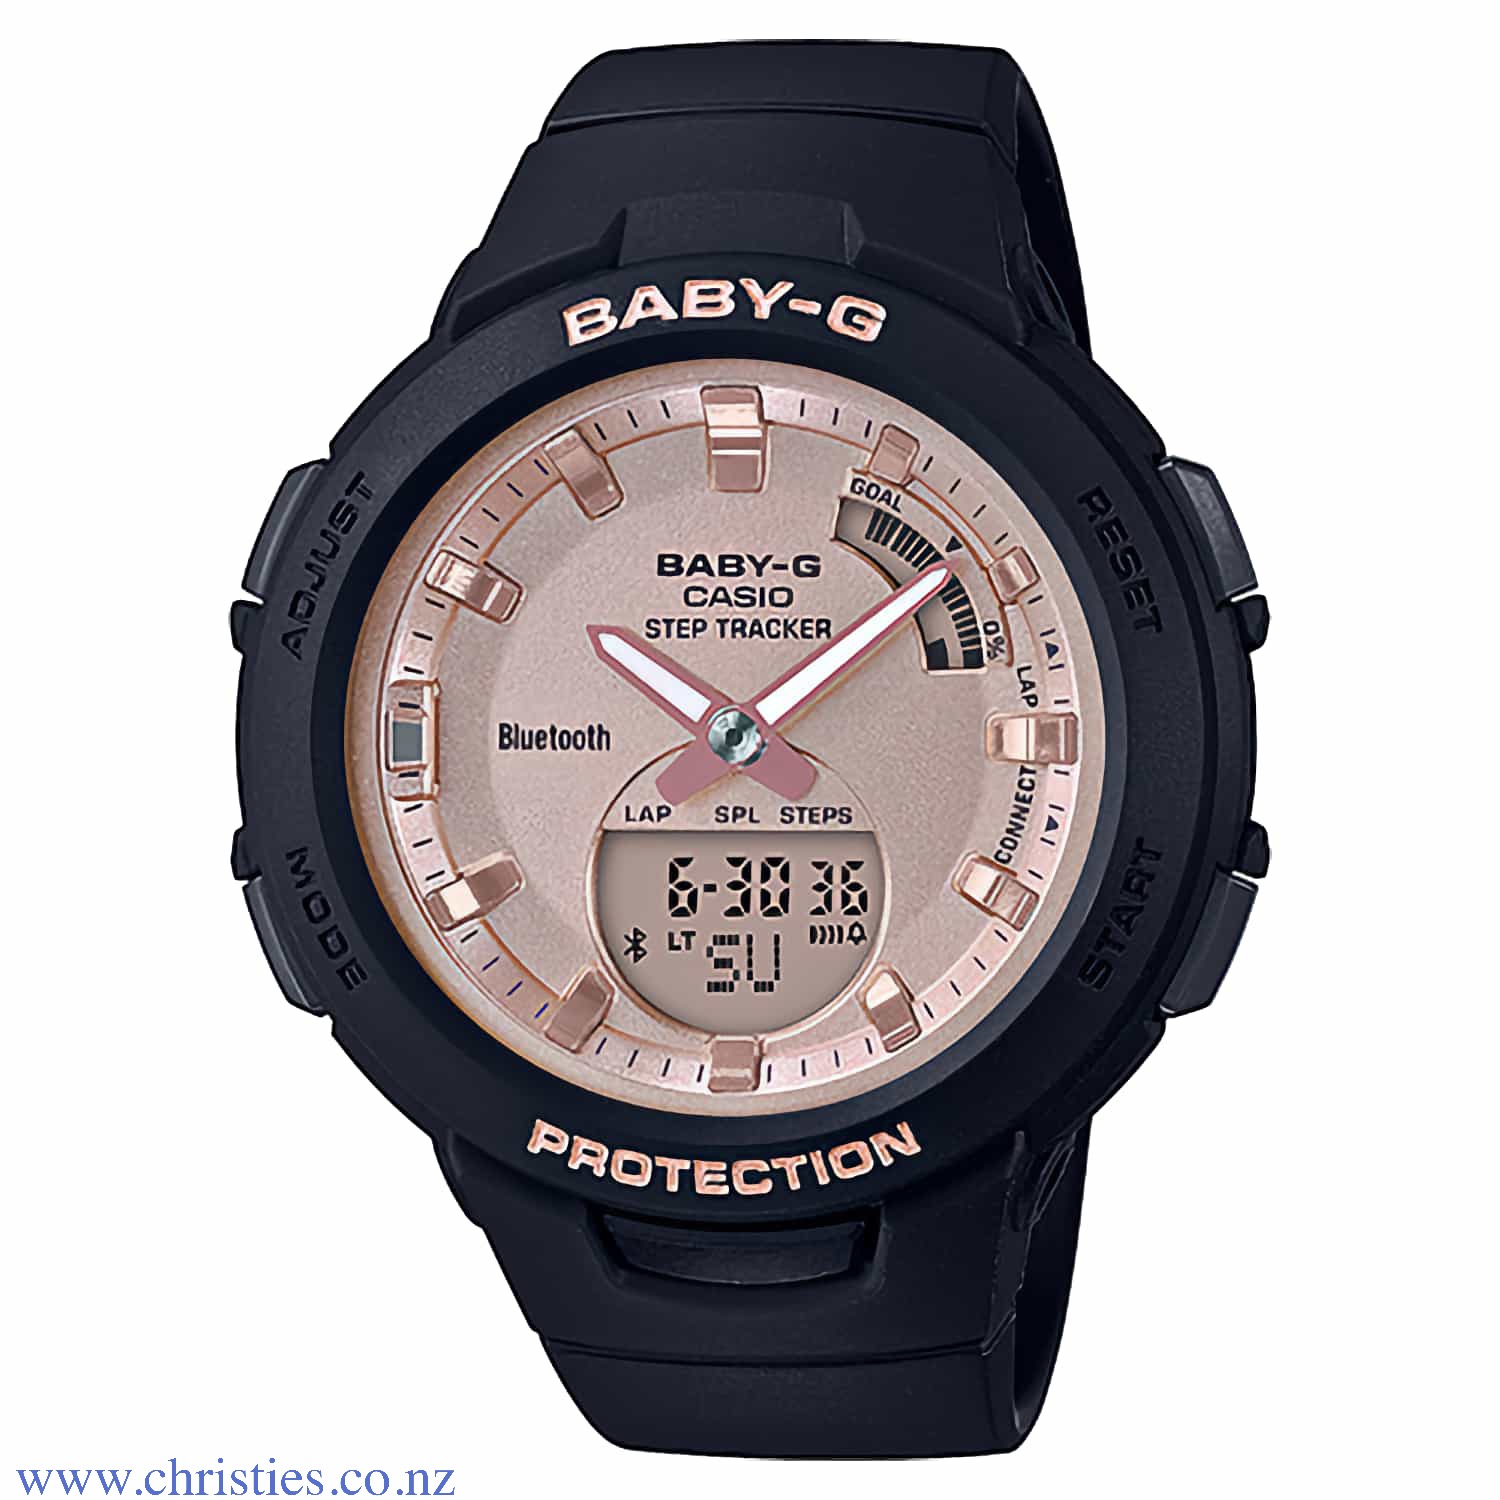 BSAB100MF-1A Casio BabY-G G-SQUAD Sports Watch. Introducing new models from the G-SQUAD BABY-G sports lineup with pink gold colouring that adds plenty of style to daily workouts and training. These new models are available in black and white, which are co